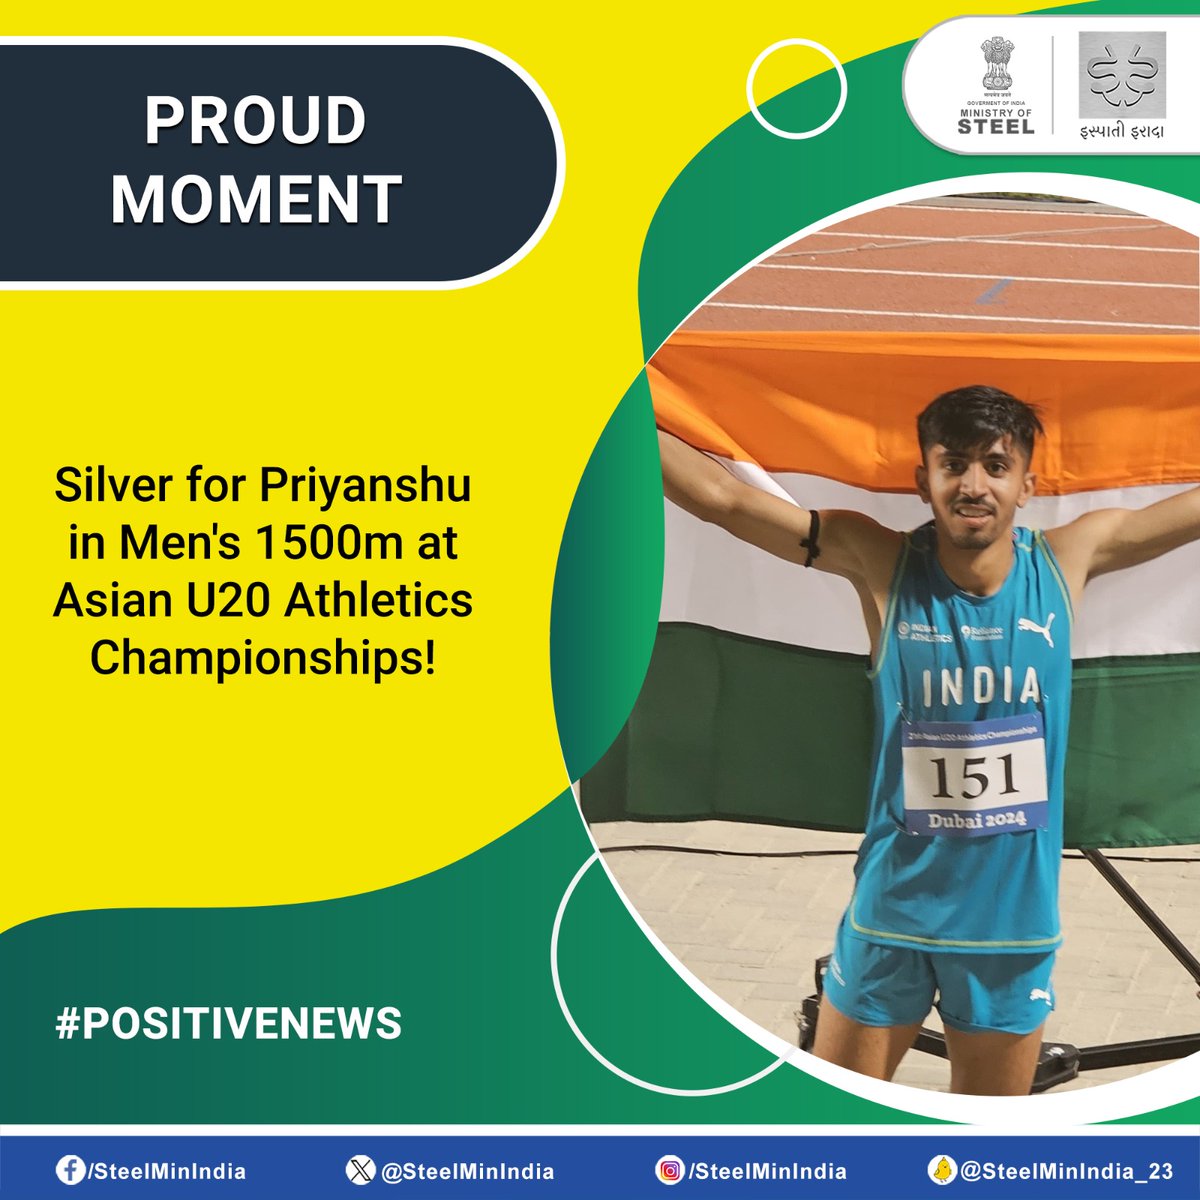 #Priyanshu showcased a #stellar performance by Clocking an impressive time of 3:50.85 at the Asian U20 #Athletics Championships, clinching the #silver🥈in the men's 1500-meter event in Dubai!🏃🏽 Congratulations on this outstanding achievement!🇮🇳 #PositiveNews #AsianU20